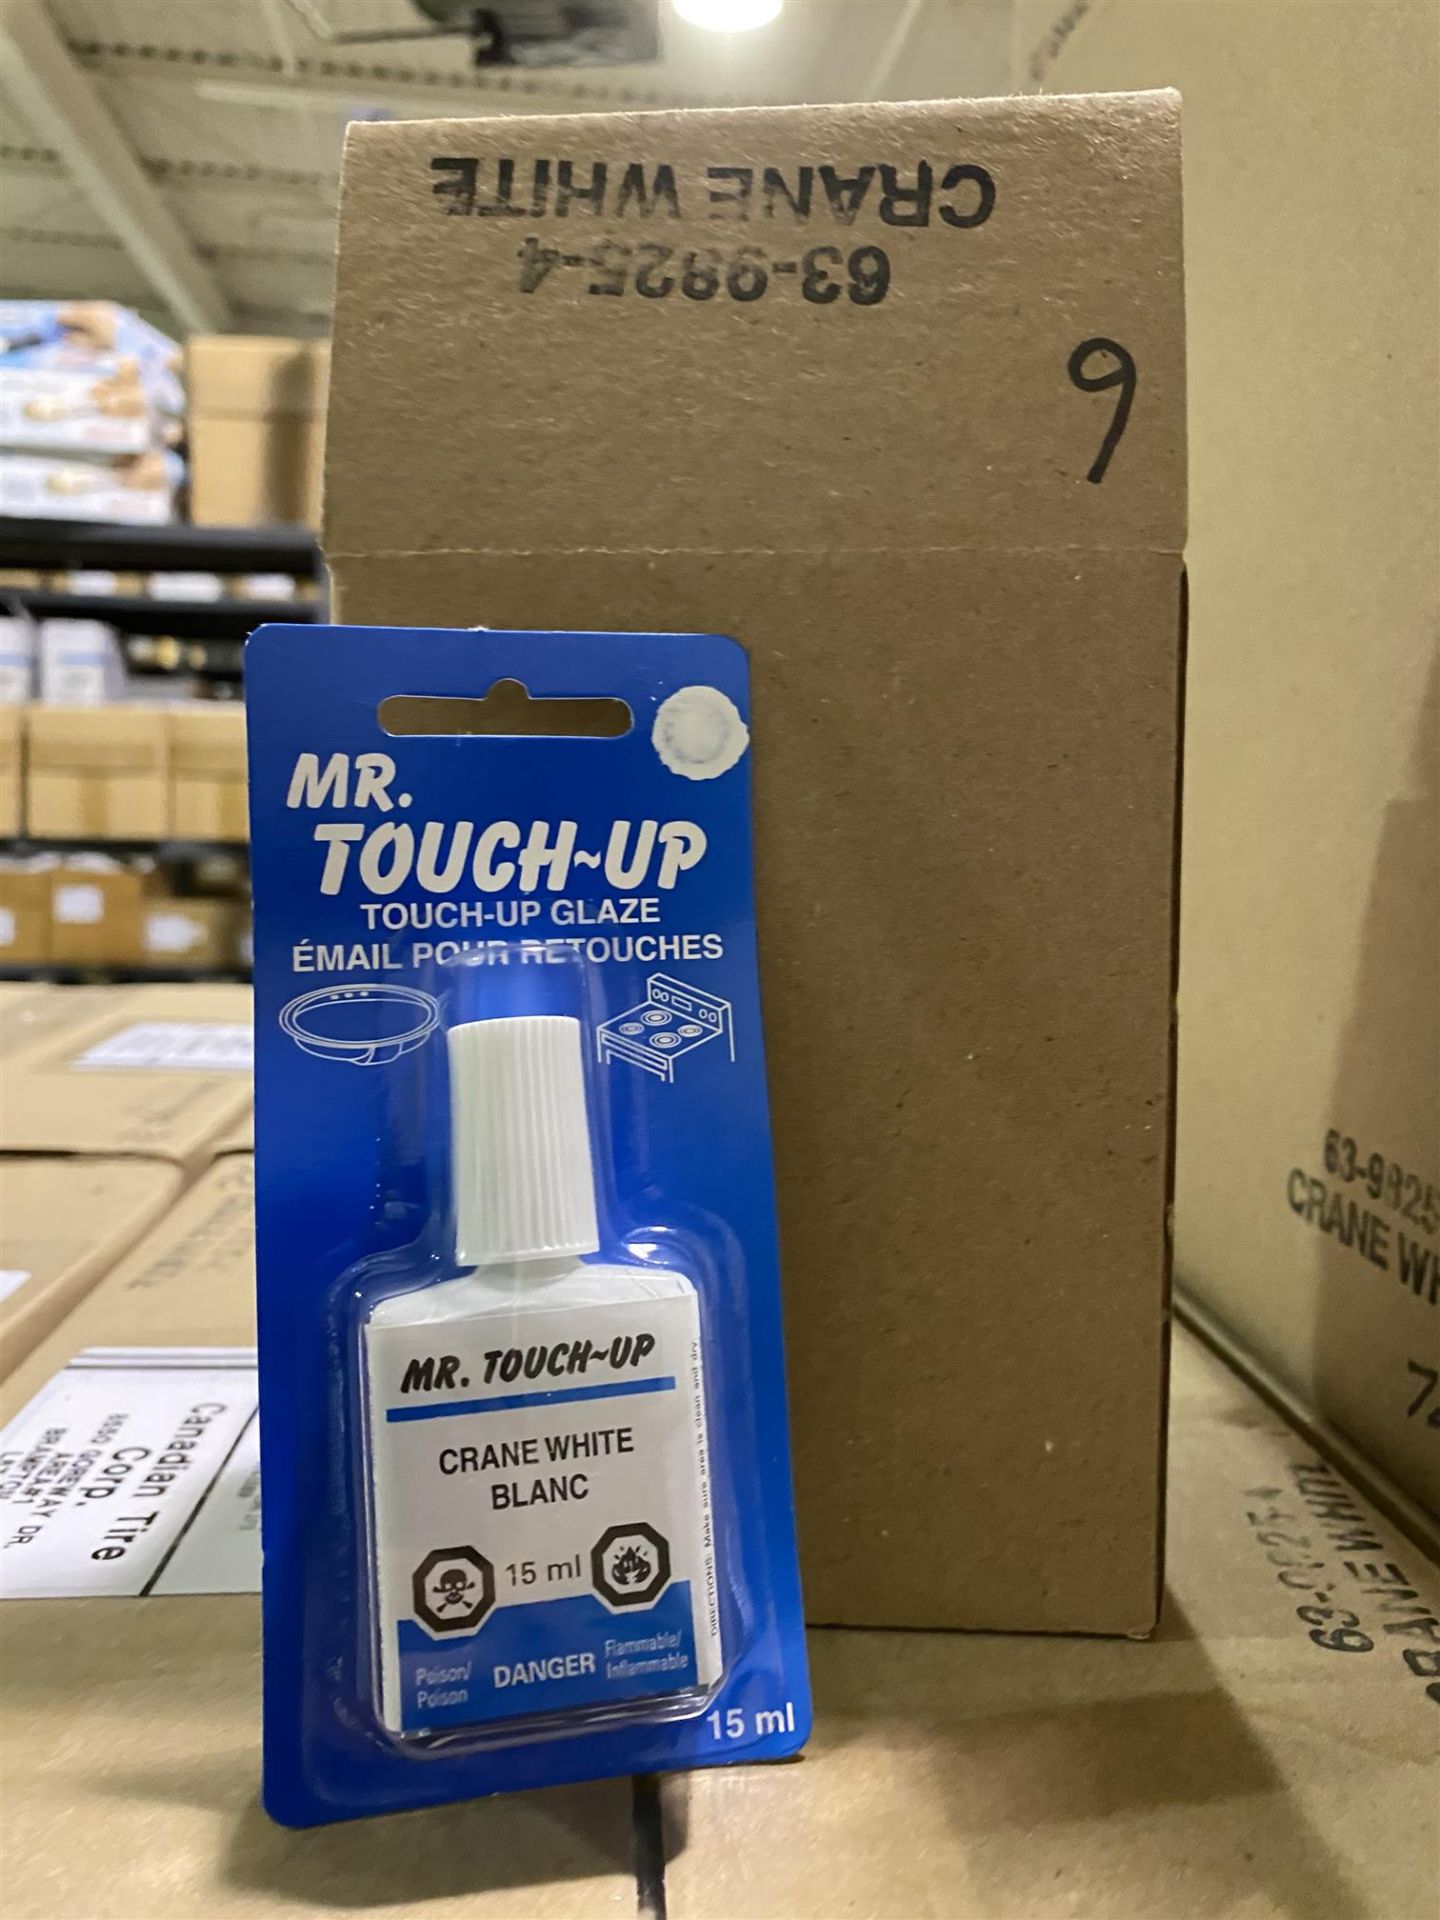 MR. TOUCH-UP - TOUCH-UP GLAZE - CRANE WHITE - 15ML - 72PCS - Image 2 of 2